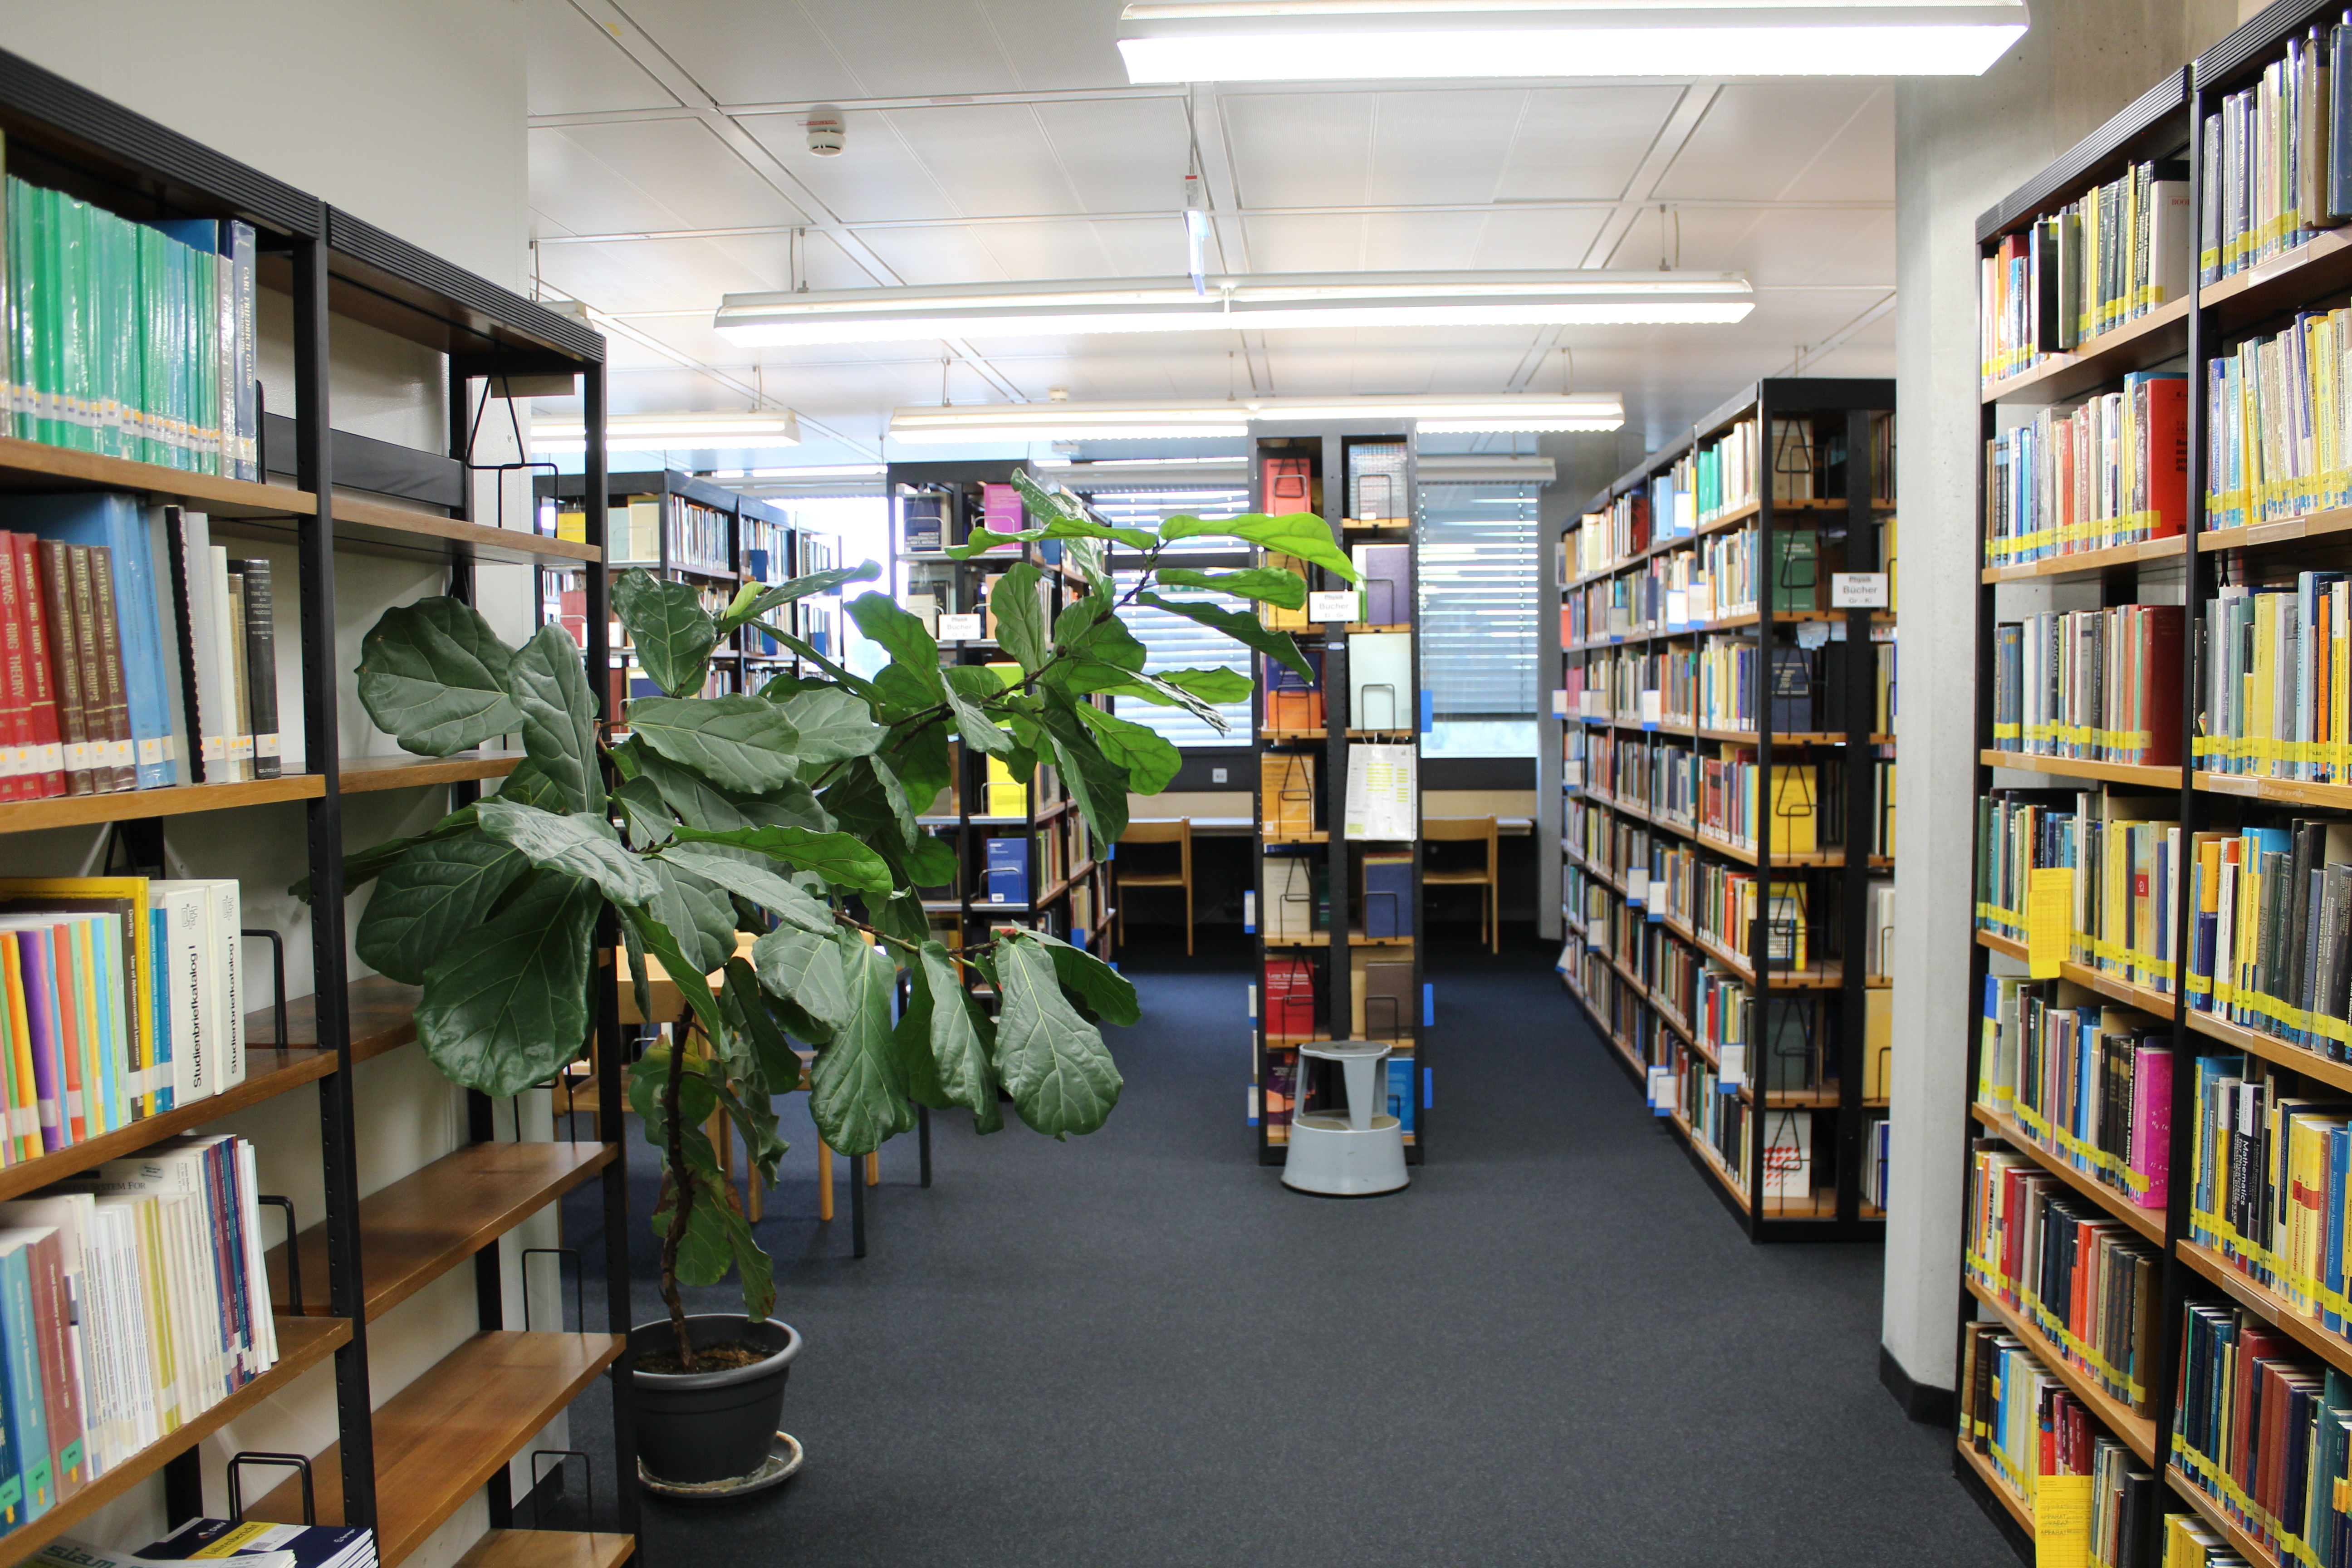 On the right are books from the mathematics collection, straight ahead are shelves with books from the physics collection.